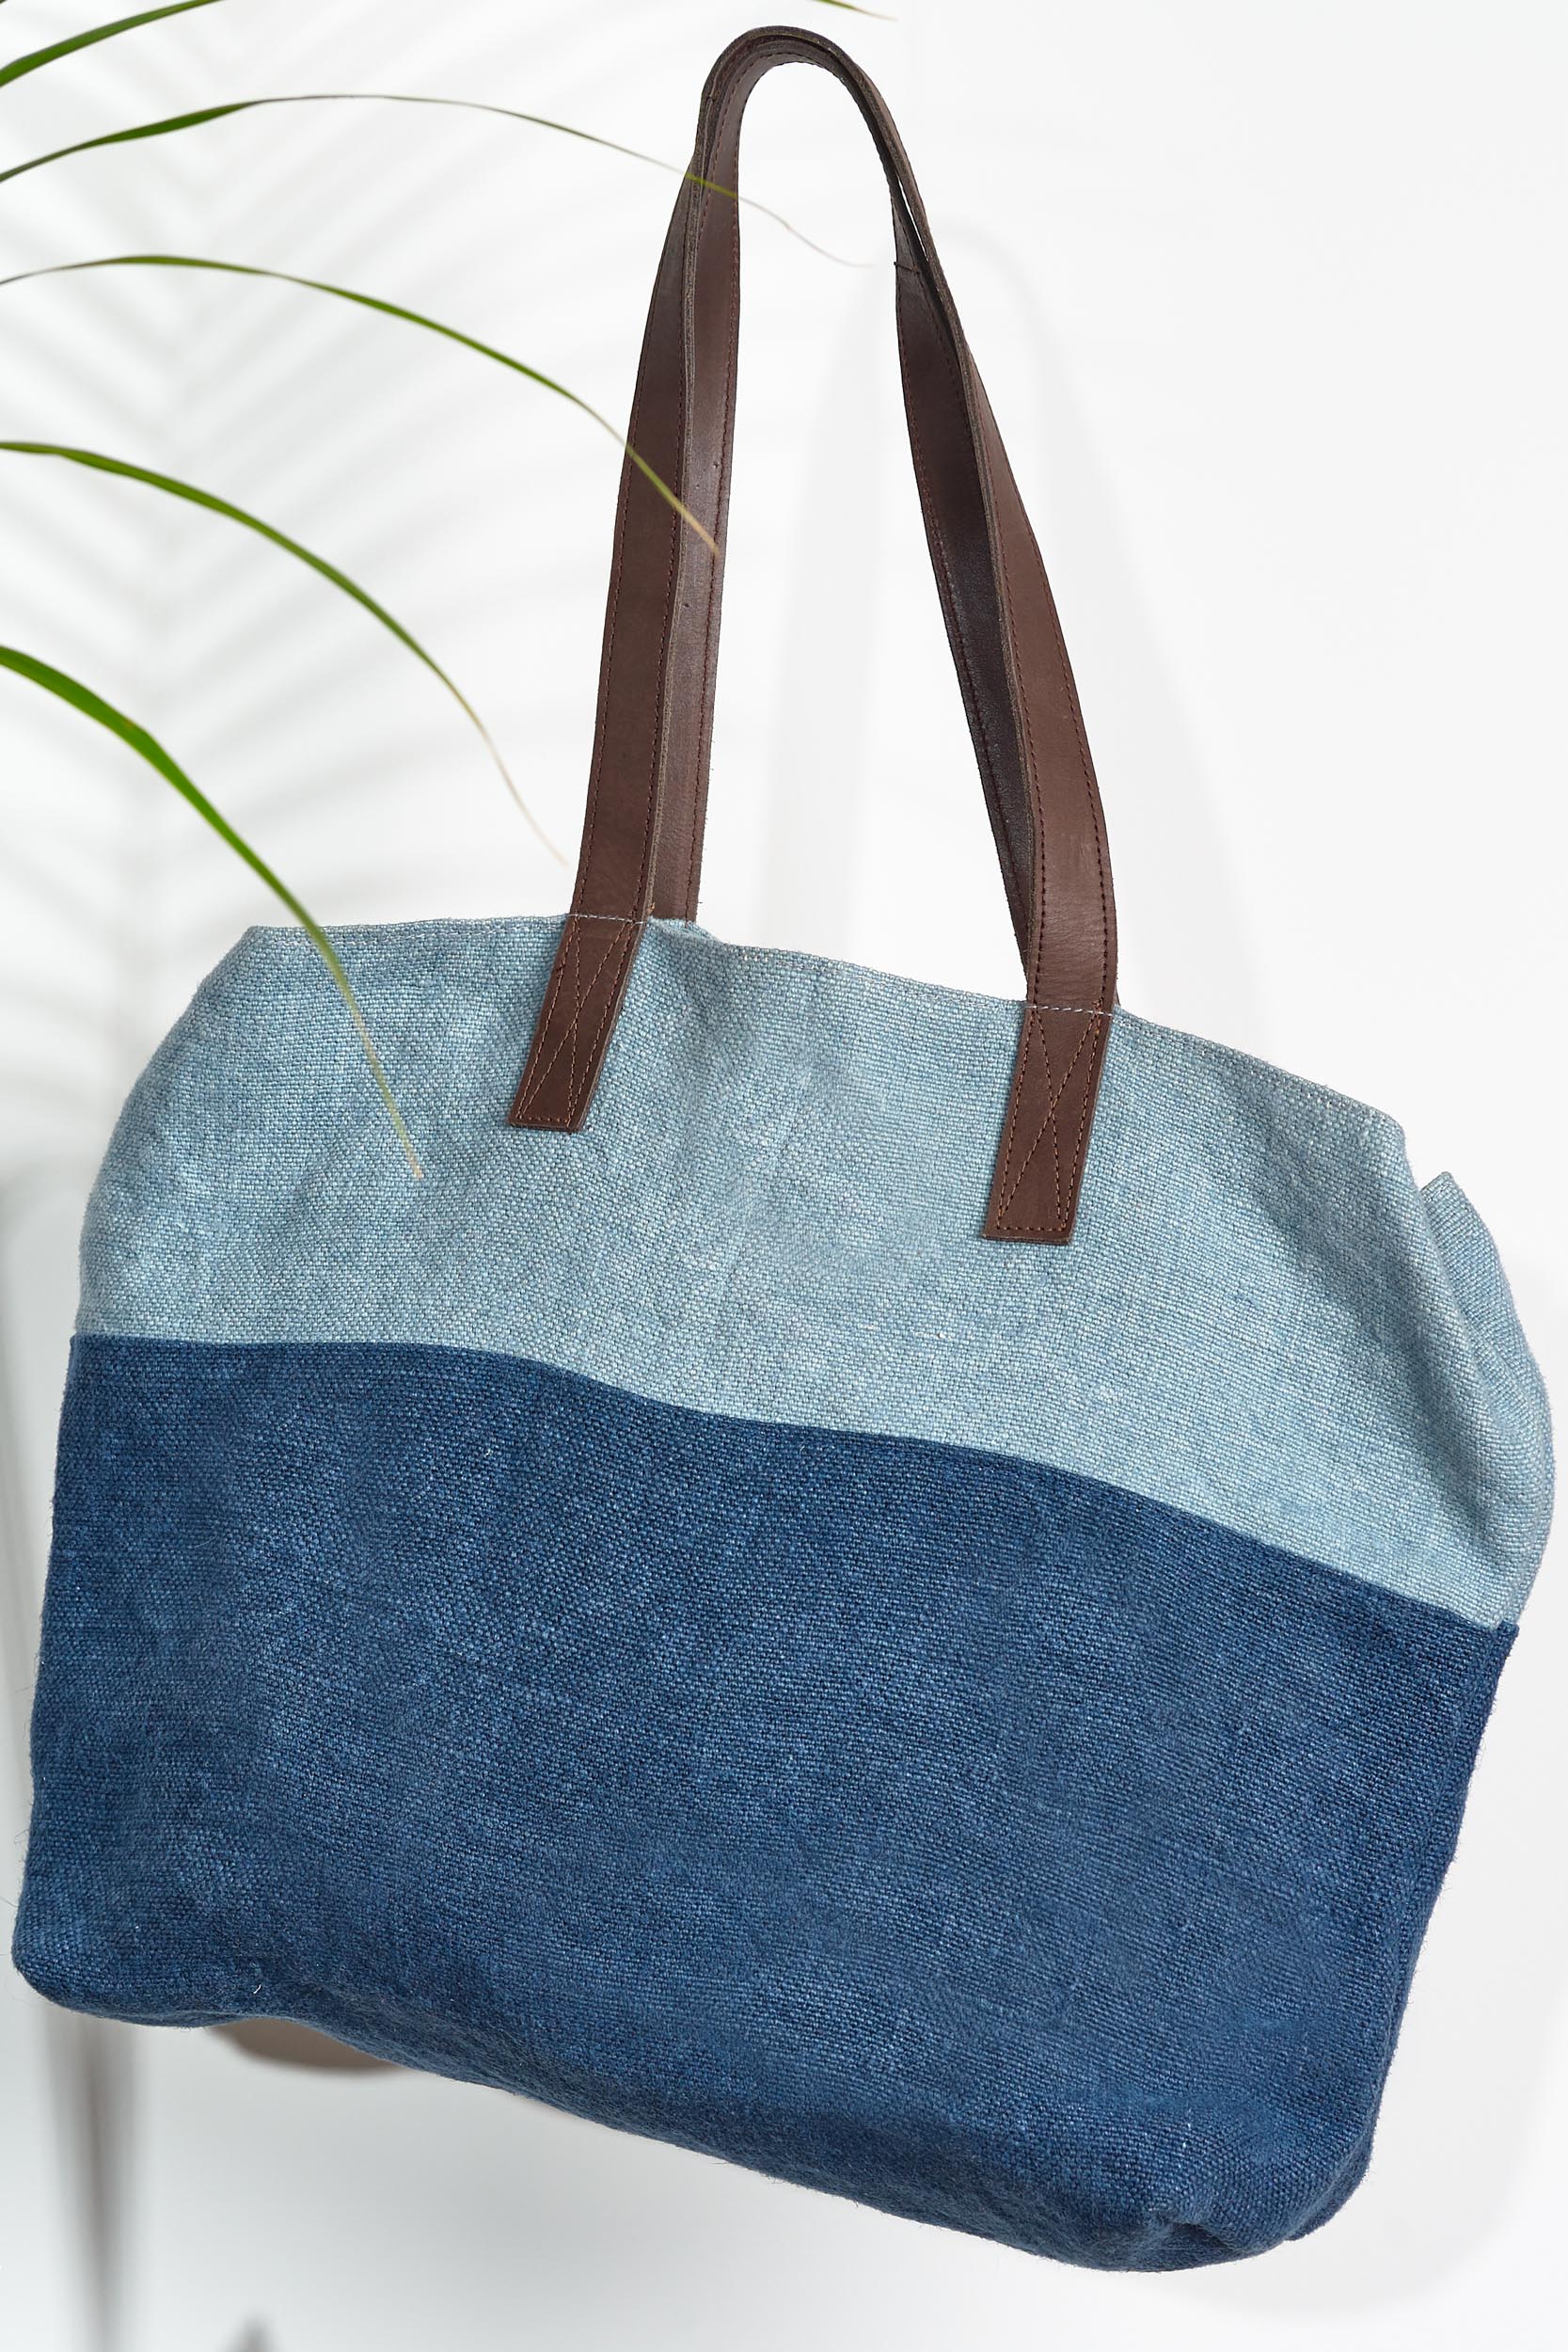 A large over the shoulder bag. With warm deep brown leather straps, and a two toned denim body. A light blue denim thick strip covers 1/4 of the bag and the rest is a classic deep blue denim.